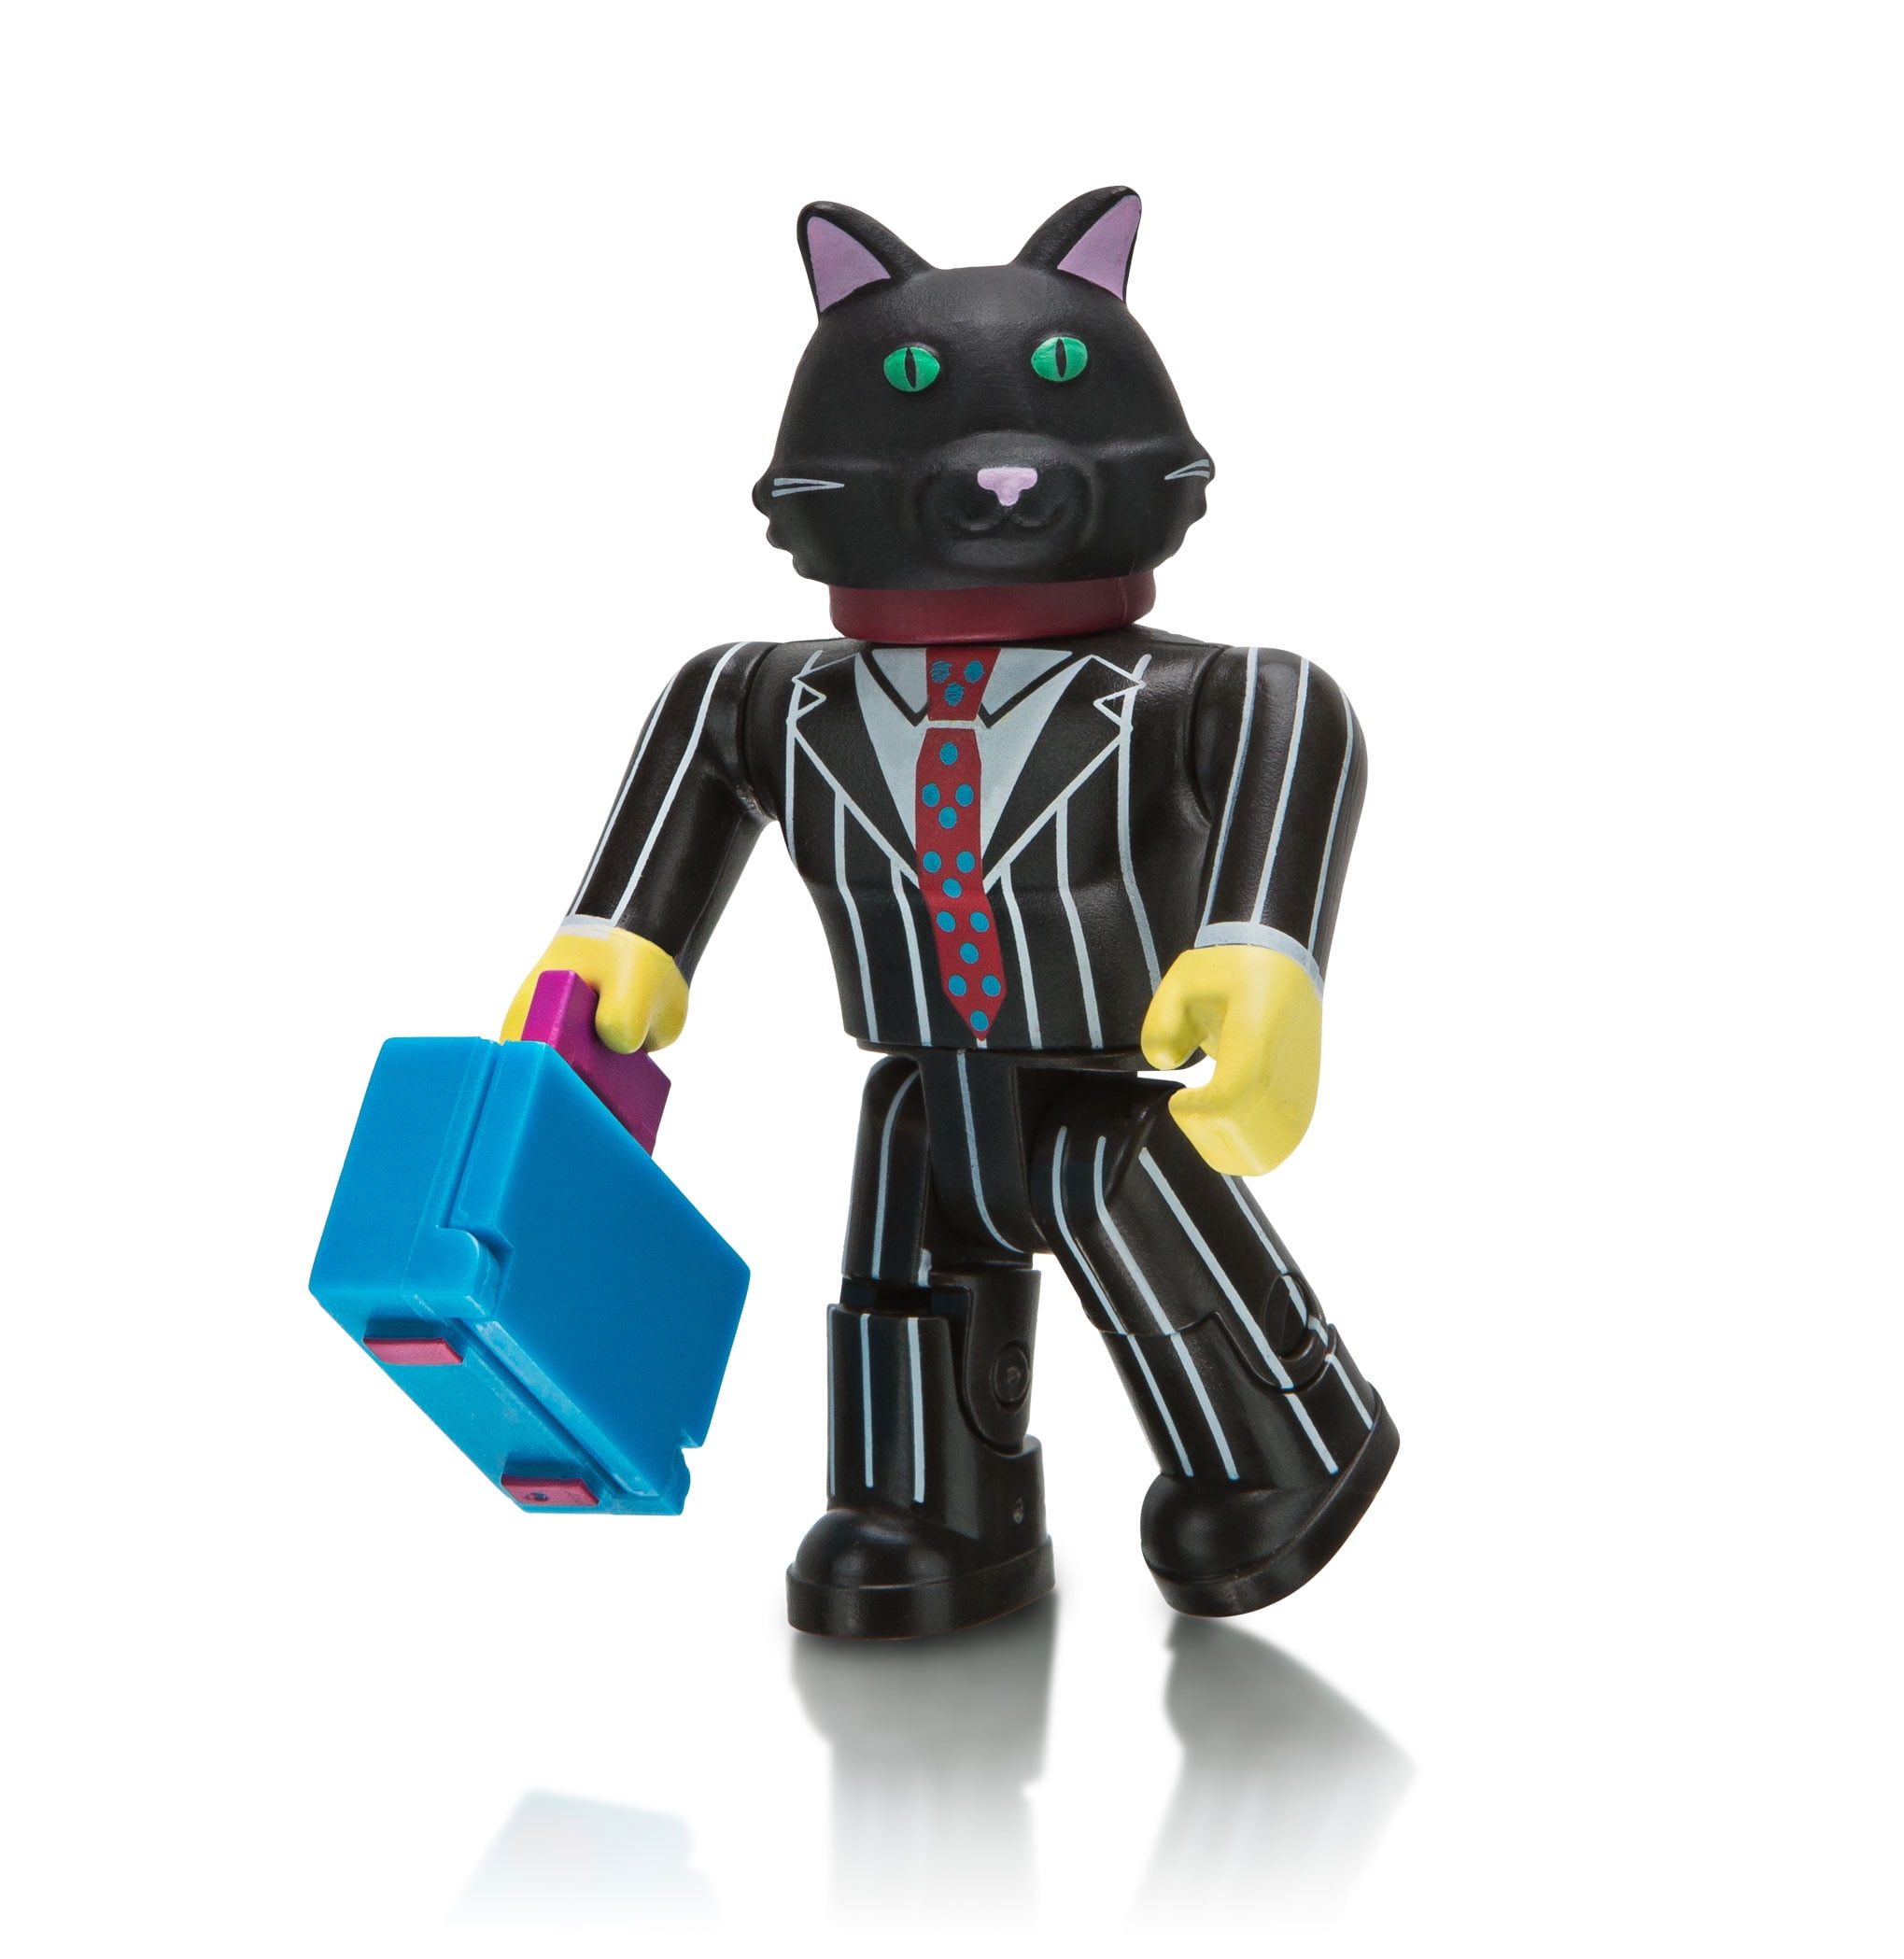 Roblox Celebrity Collection Series 1 Mystery Figure Includes 1 Figure Exclusive Virtual Item Walmart Com Walmart Com - roblox celebrity series 1